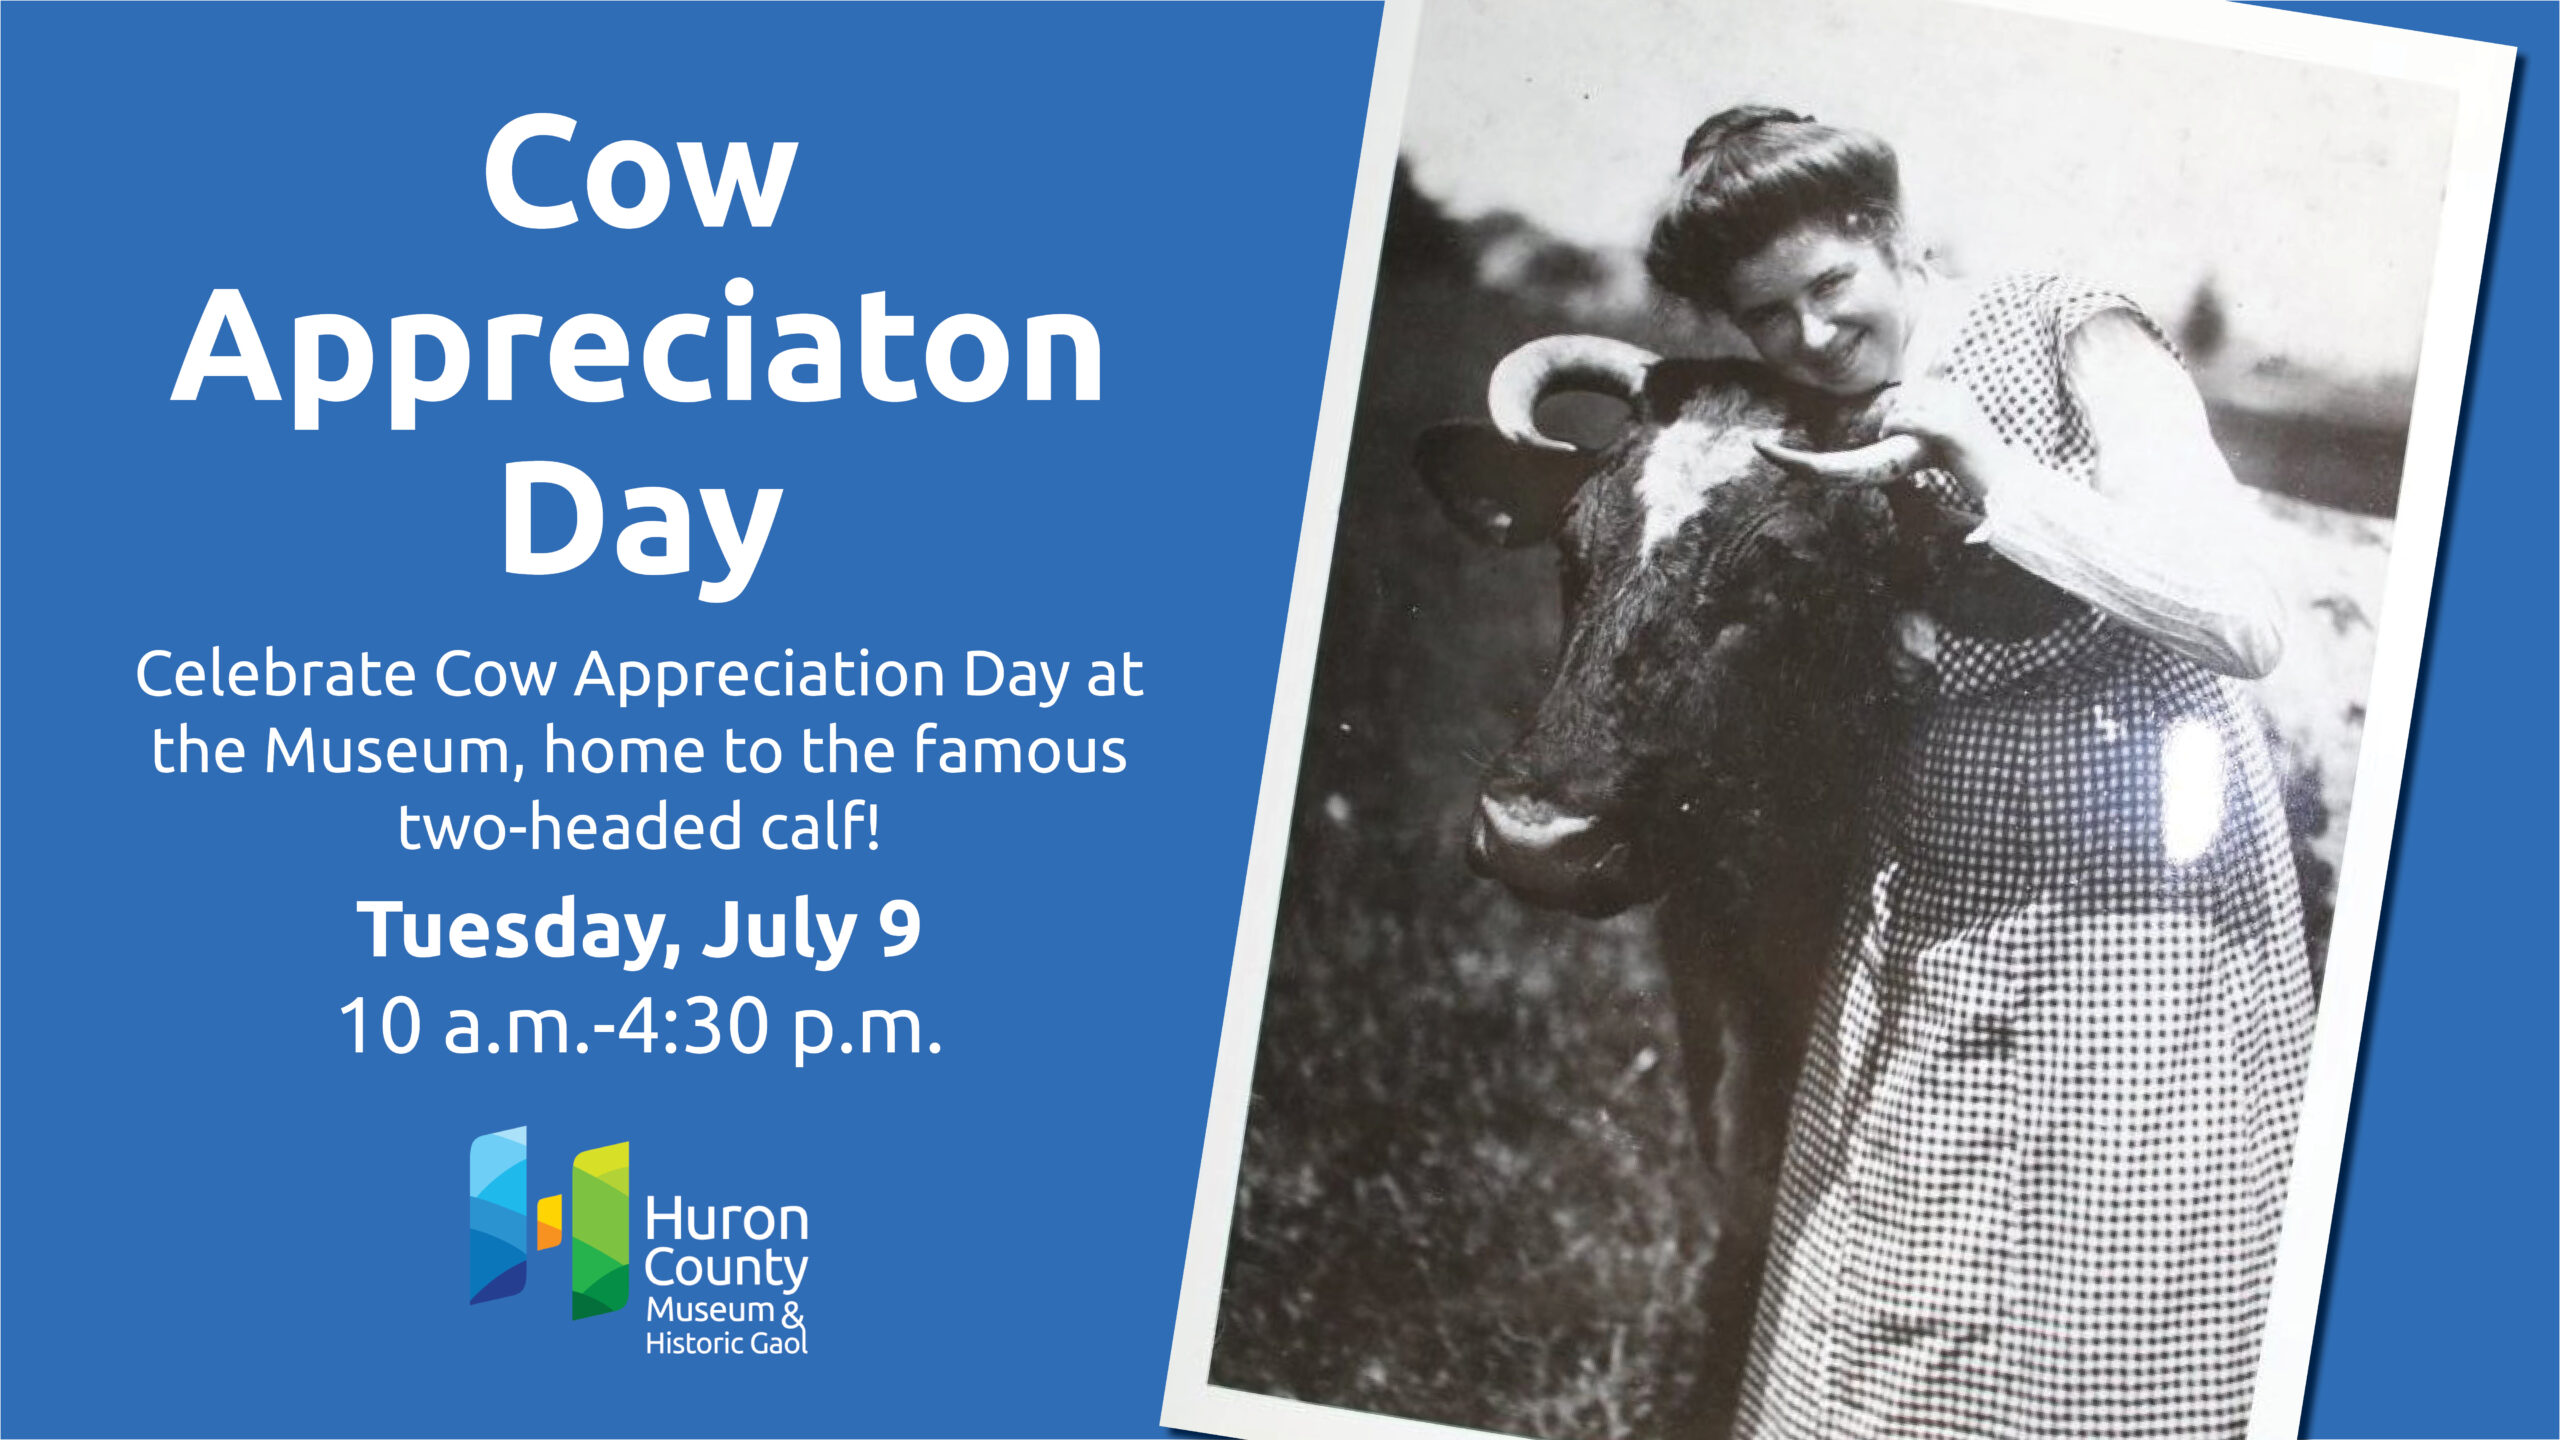 Historic black and white image of a woman hugging a cow with text promoting Cow Appreciation Day at the Museum